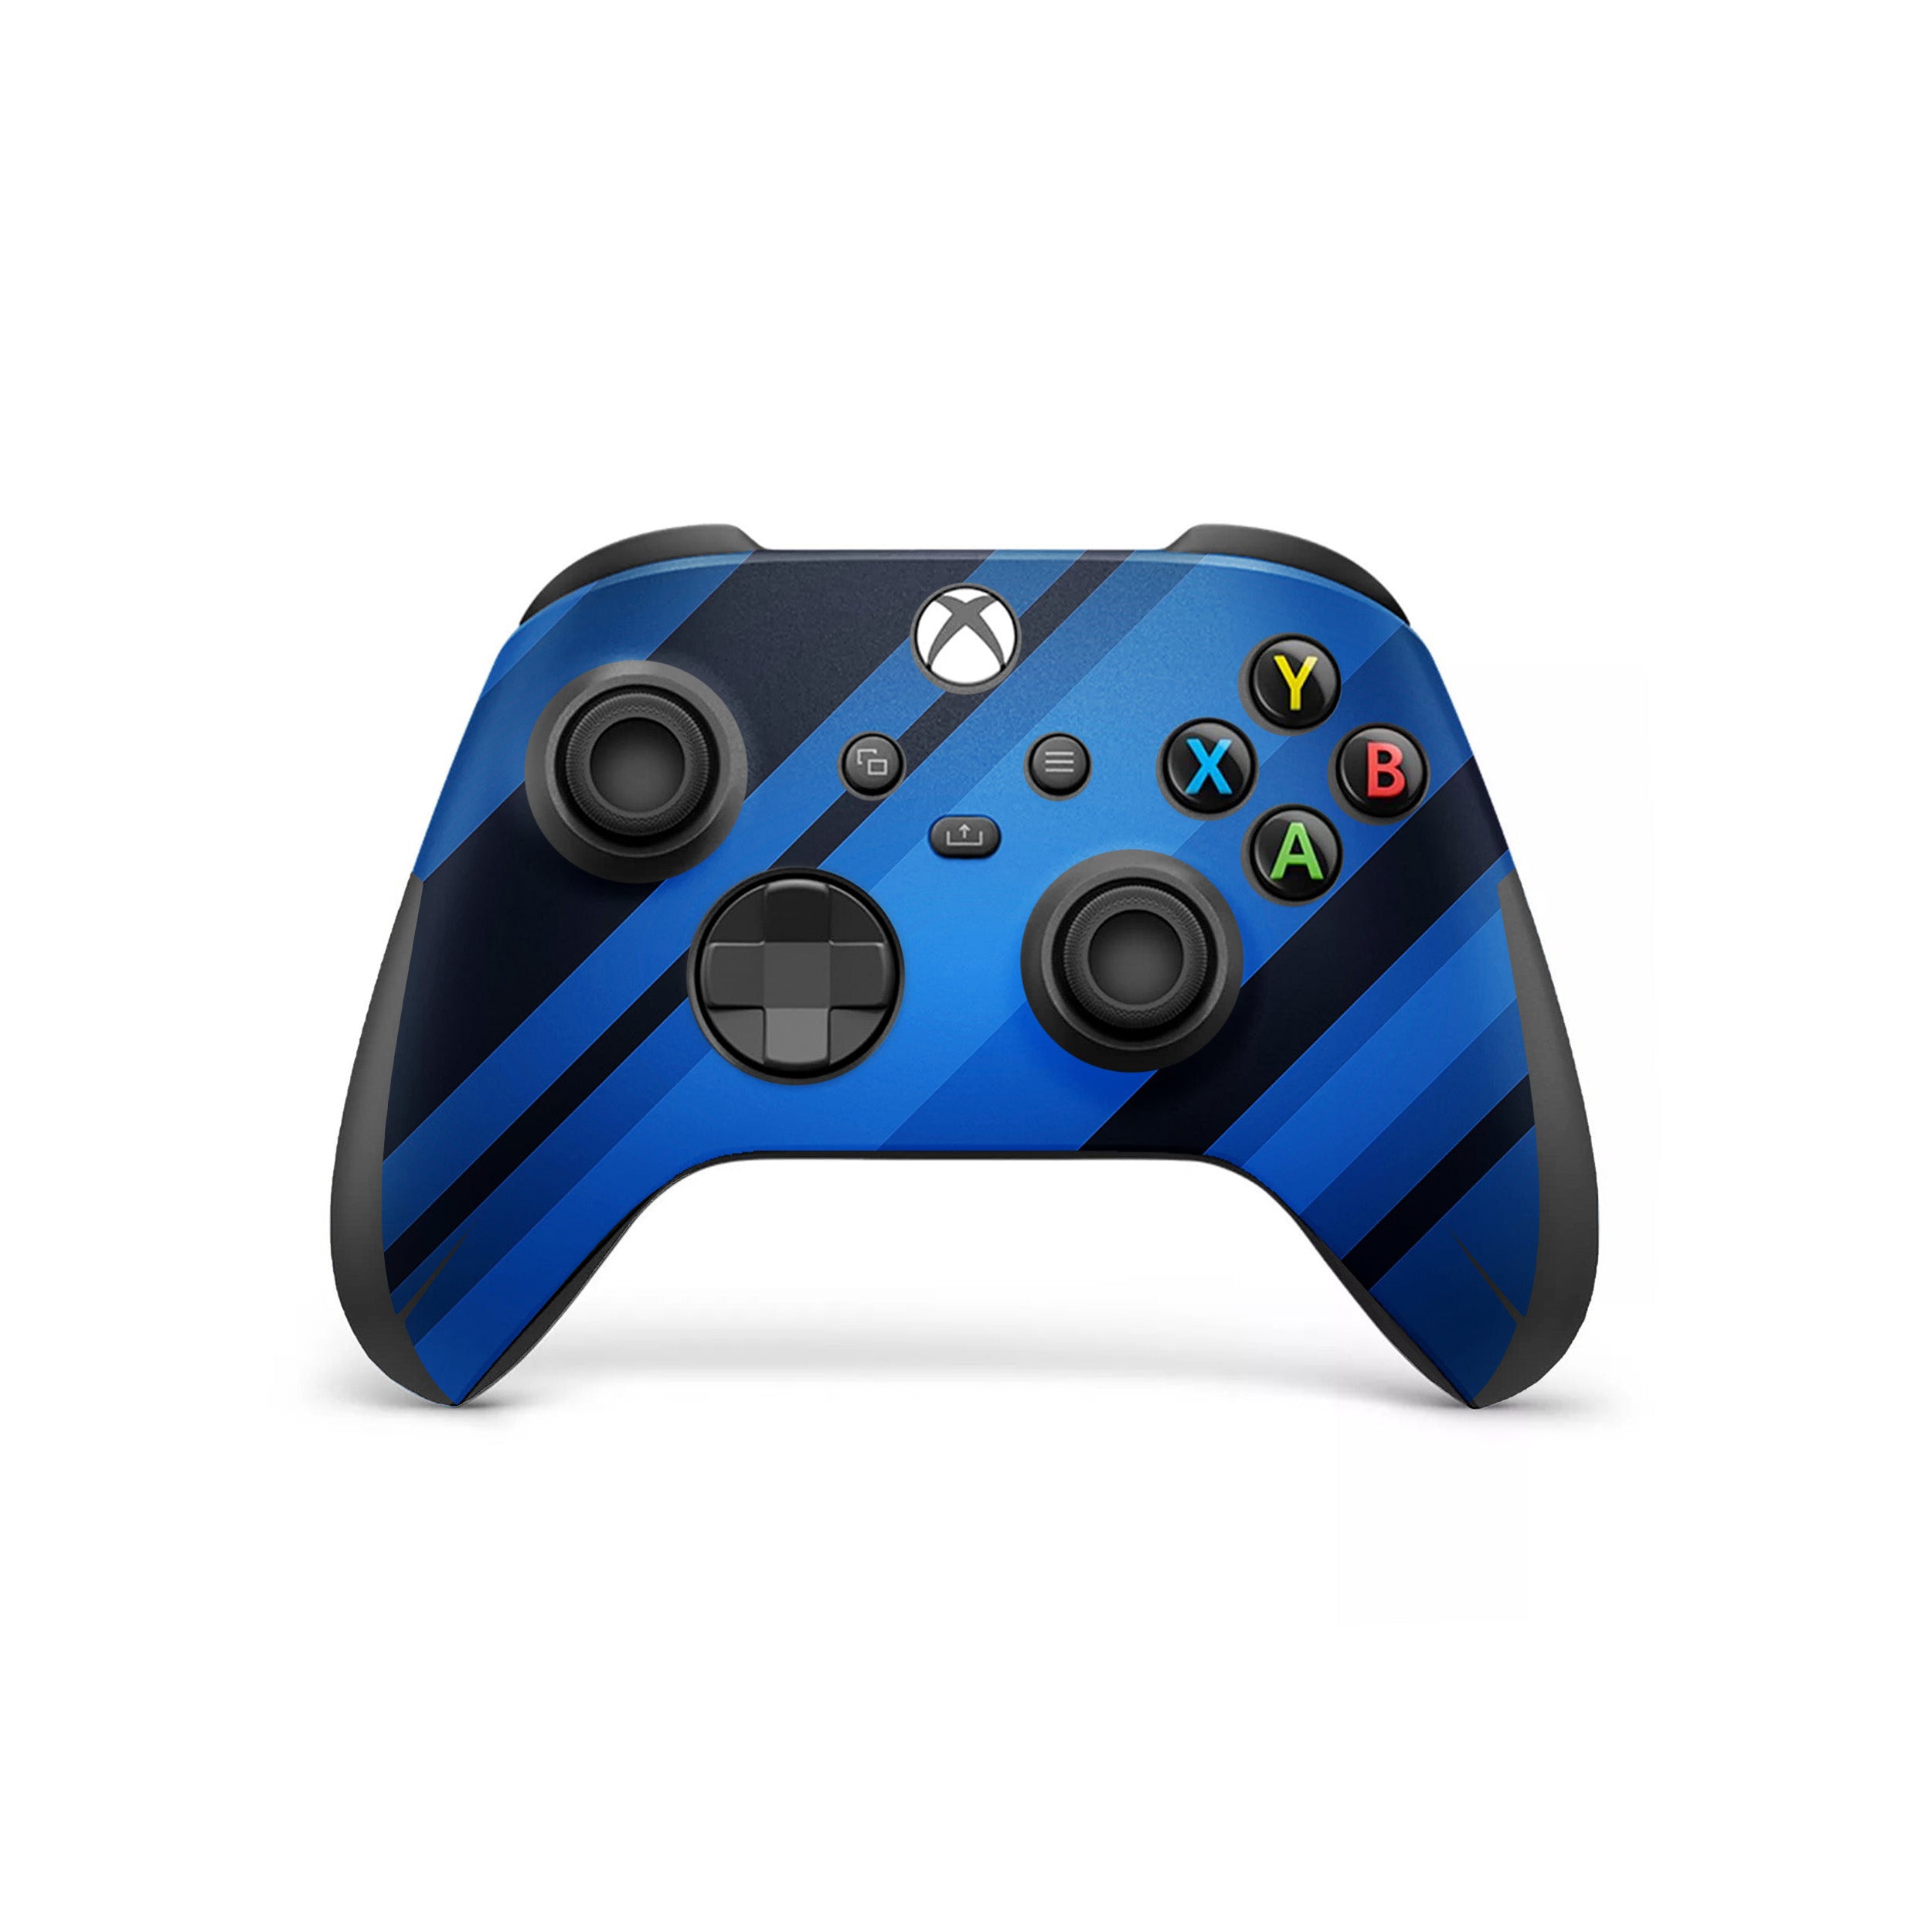 A video game skin featuring a Blue Streaks design for the Xbox Wireless Controller.